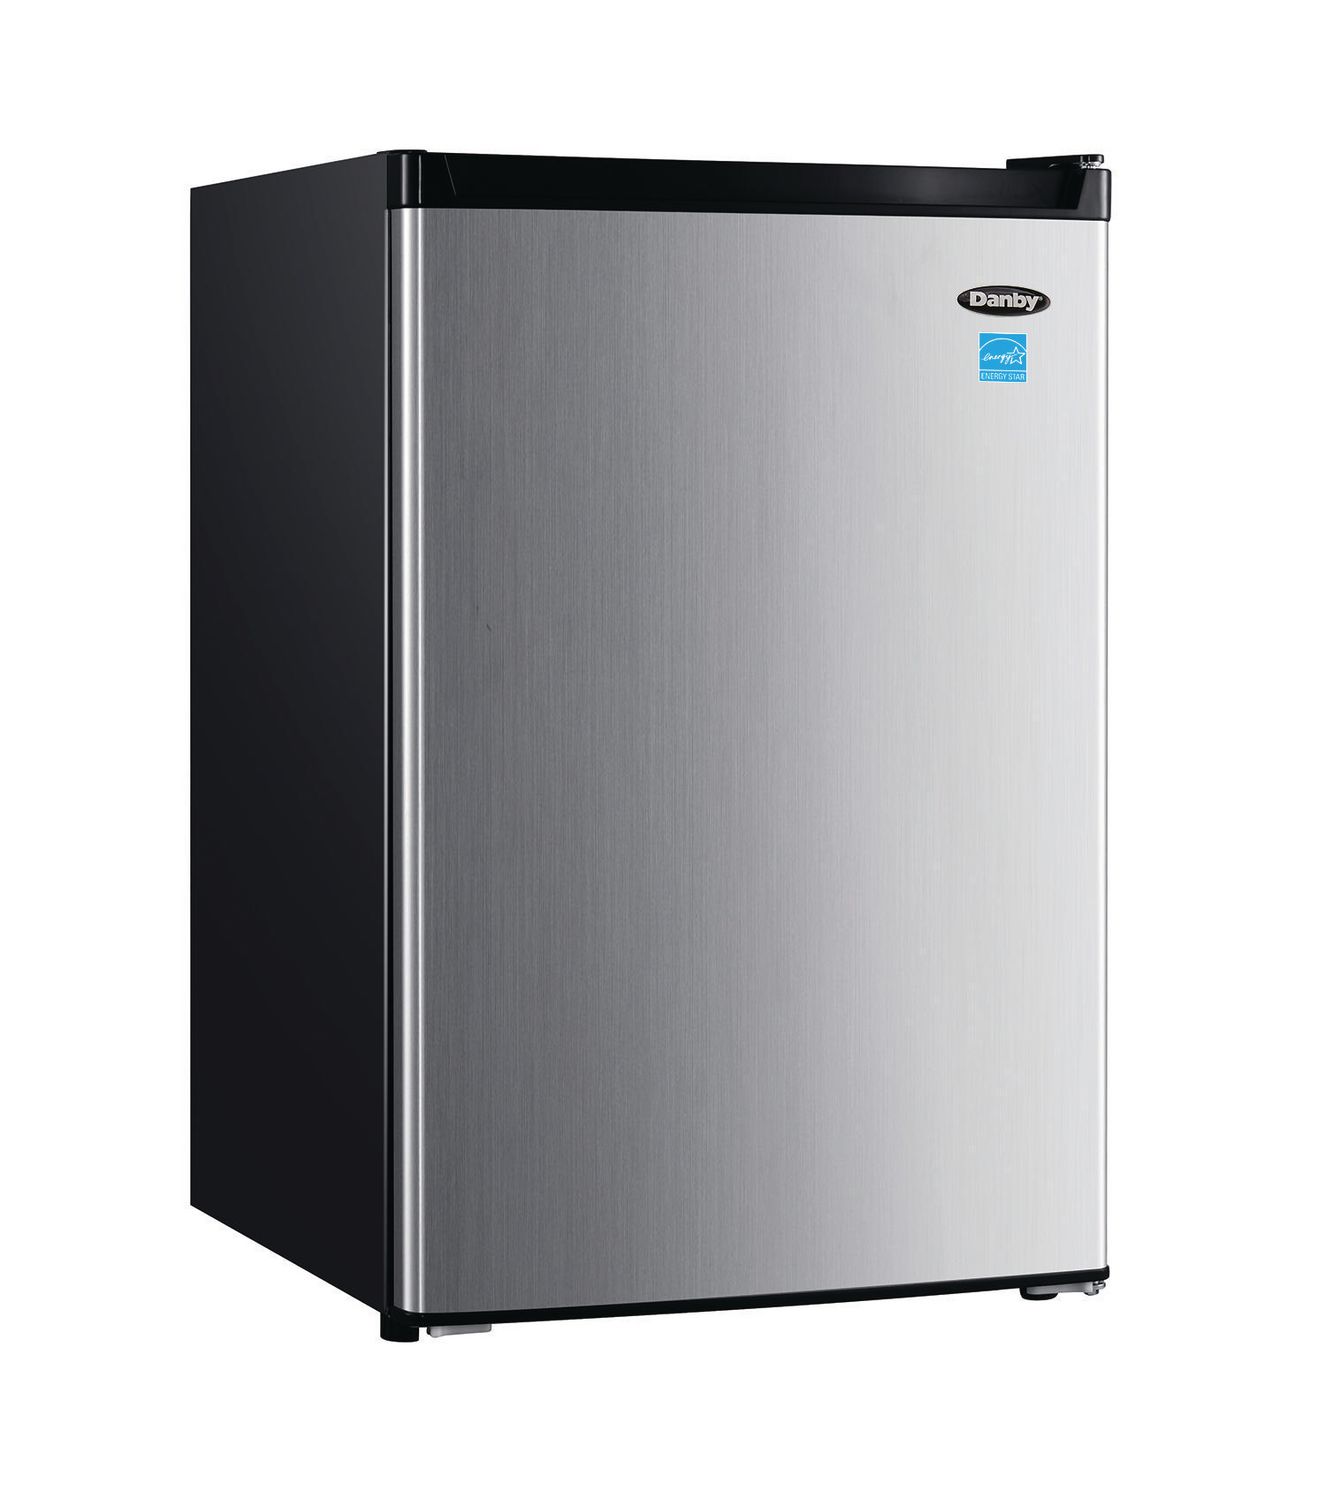 Danby Products Danby 4.5 cu.ft. Compact Refrigerator | Walmart Canada